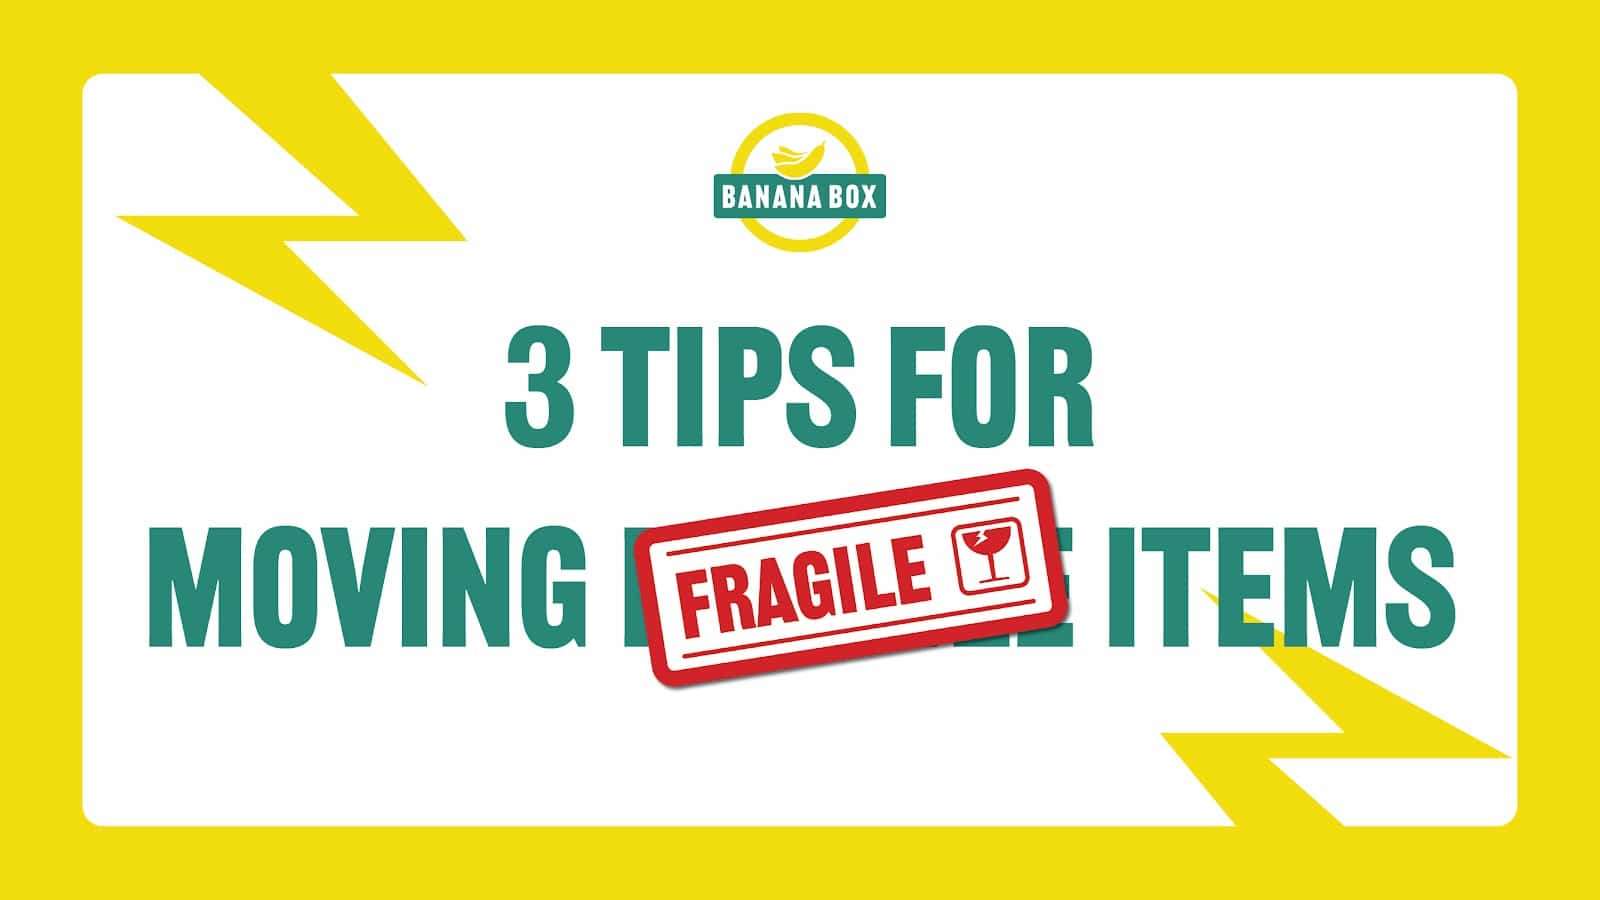 3 Tips for Moving Fragile Items featured image